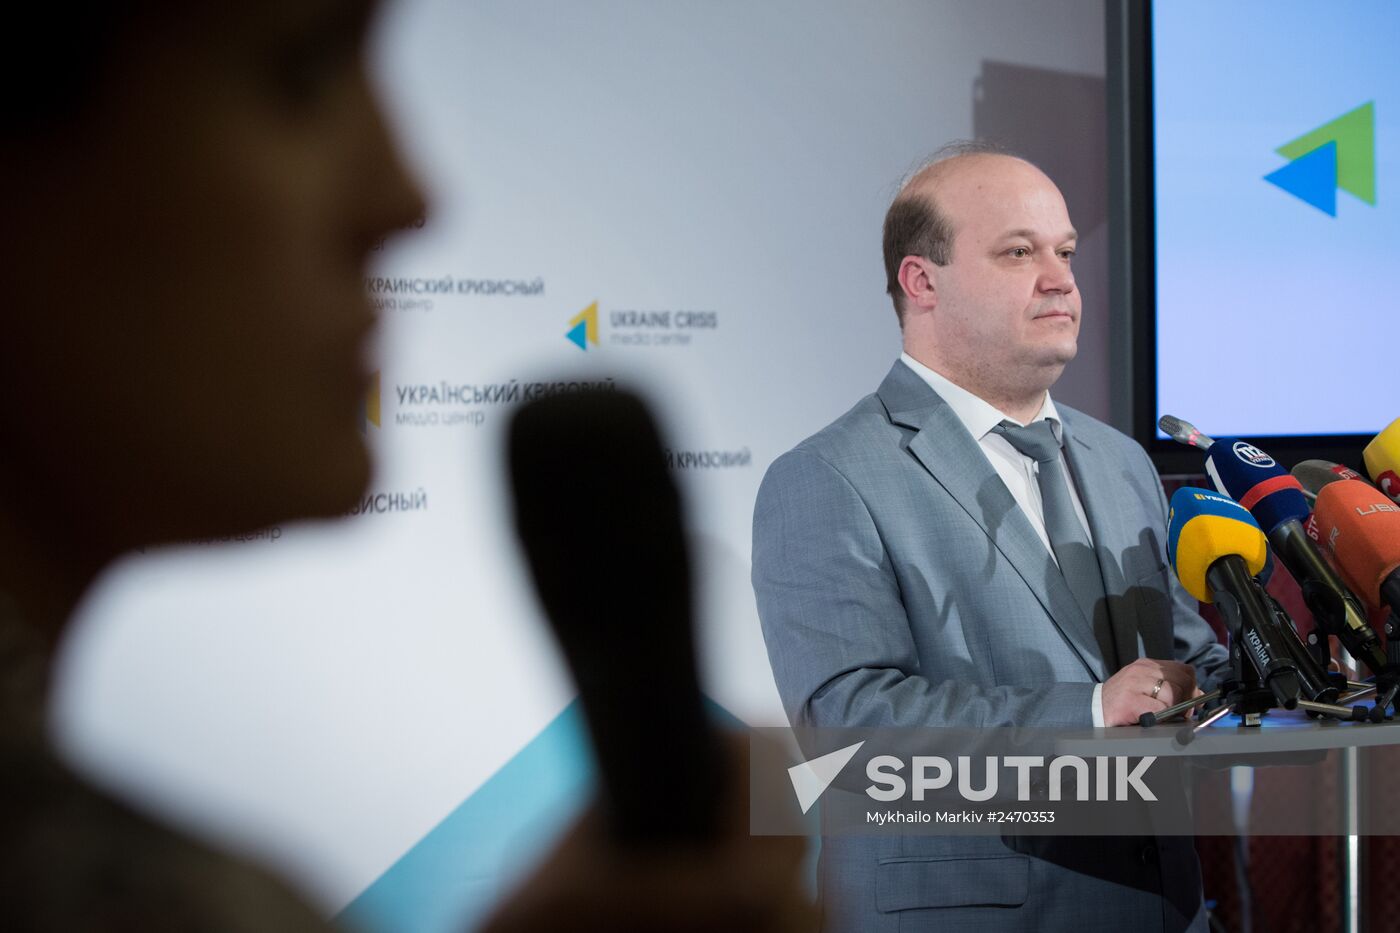 Briefing by Deputy Head of the Ukrainian Presidential Administration Valery Chaly